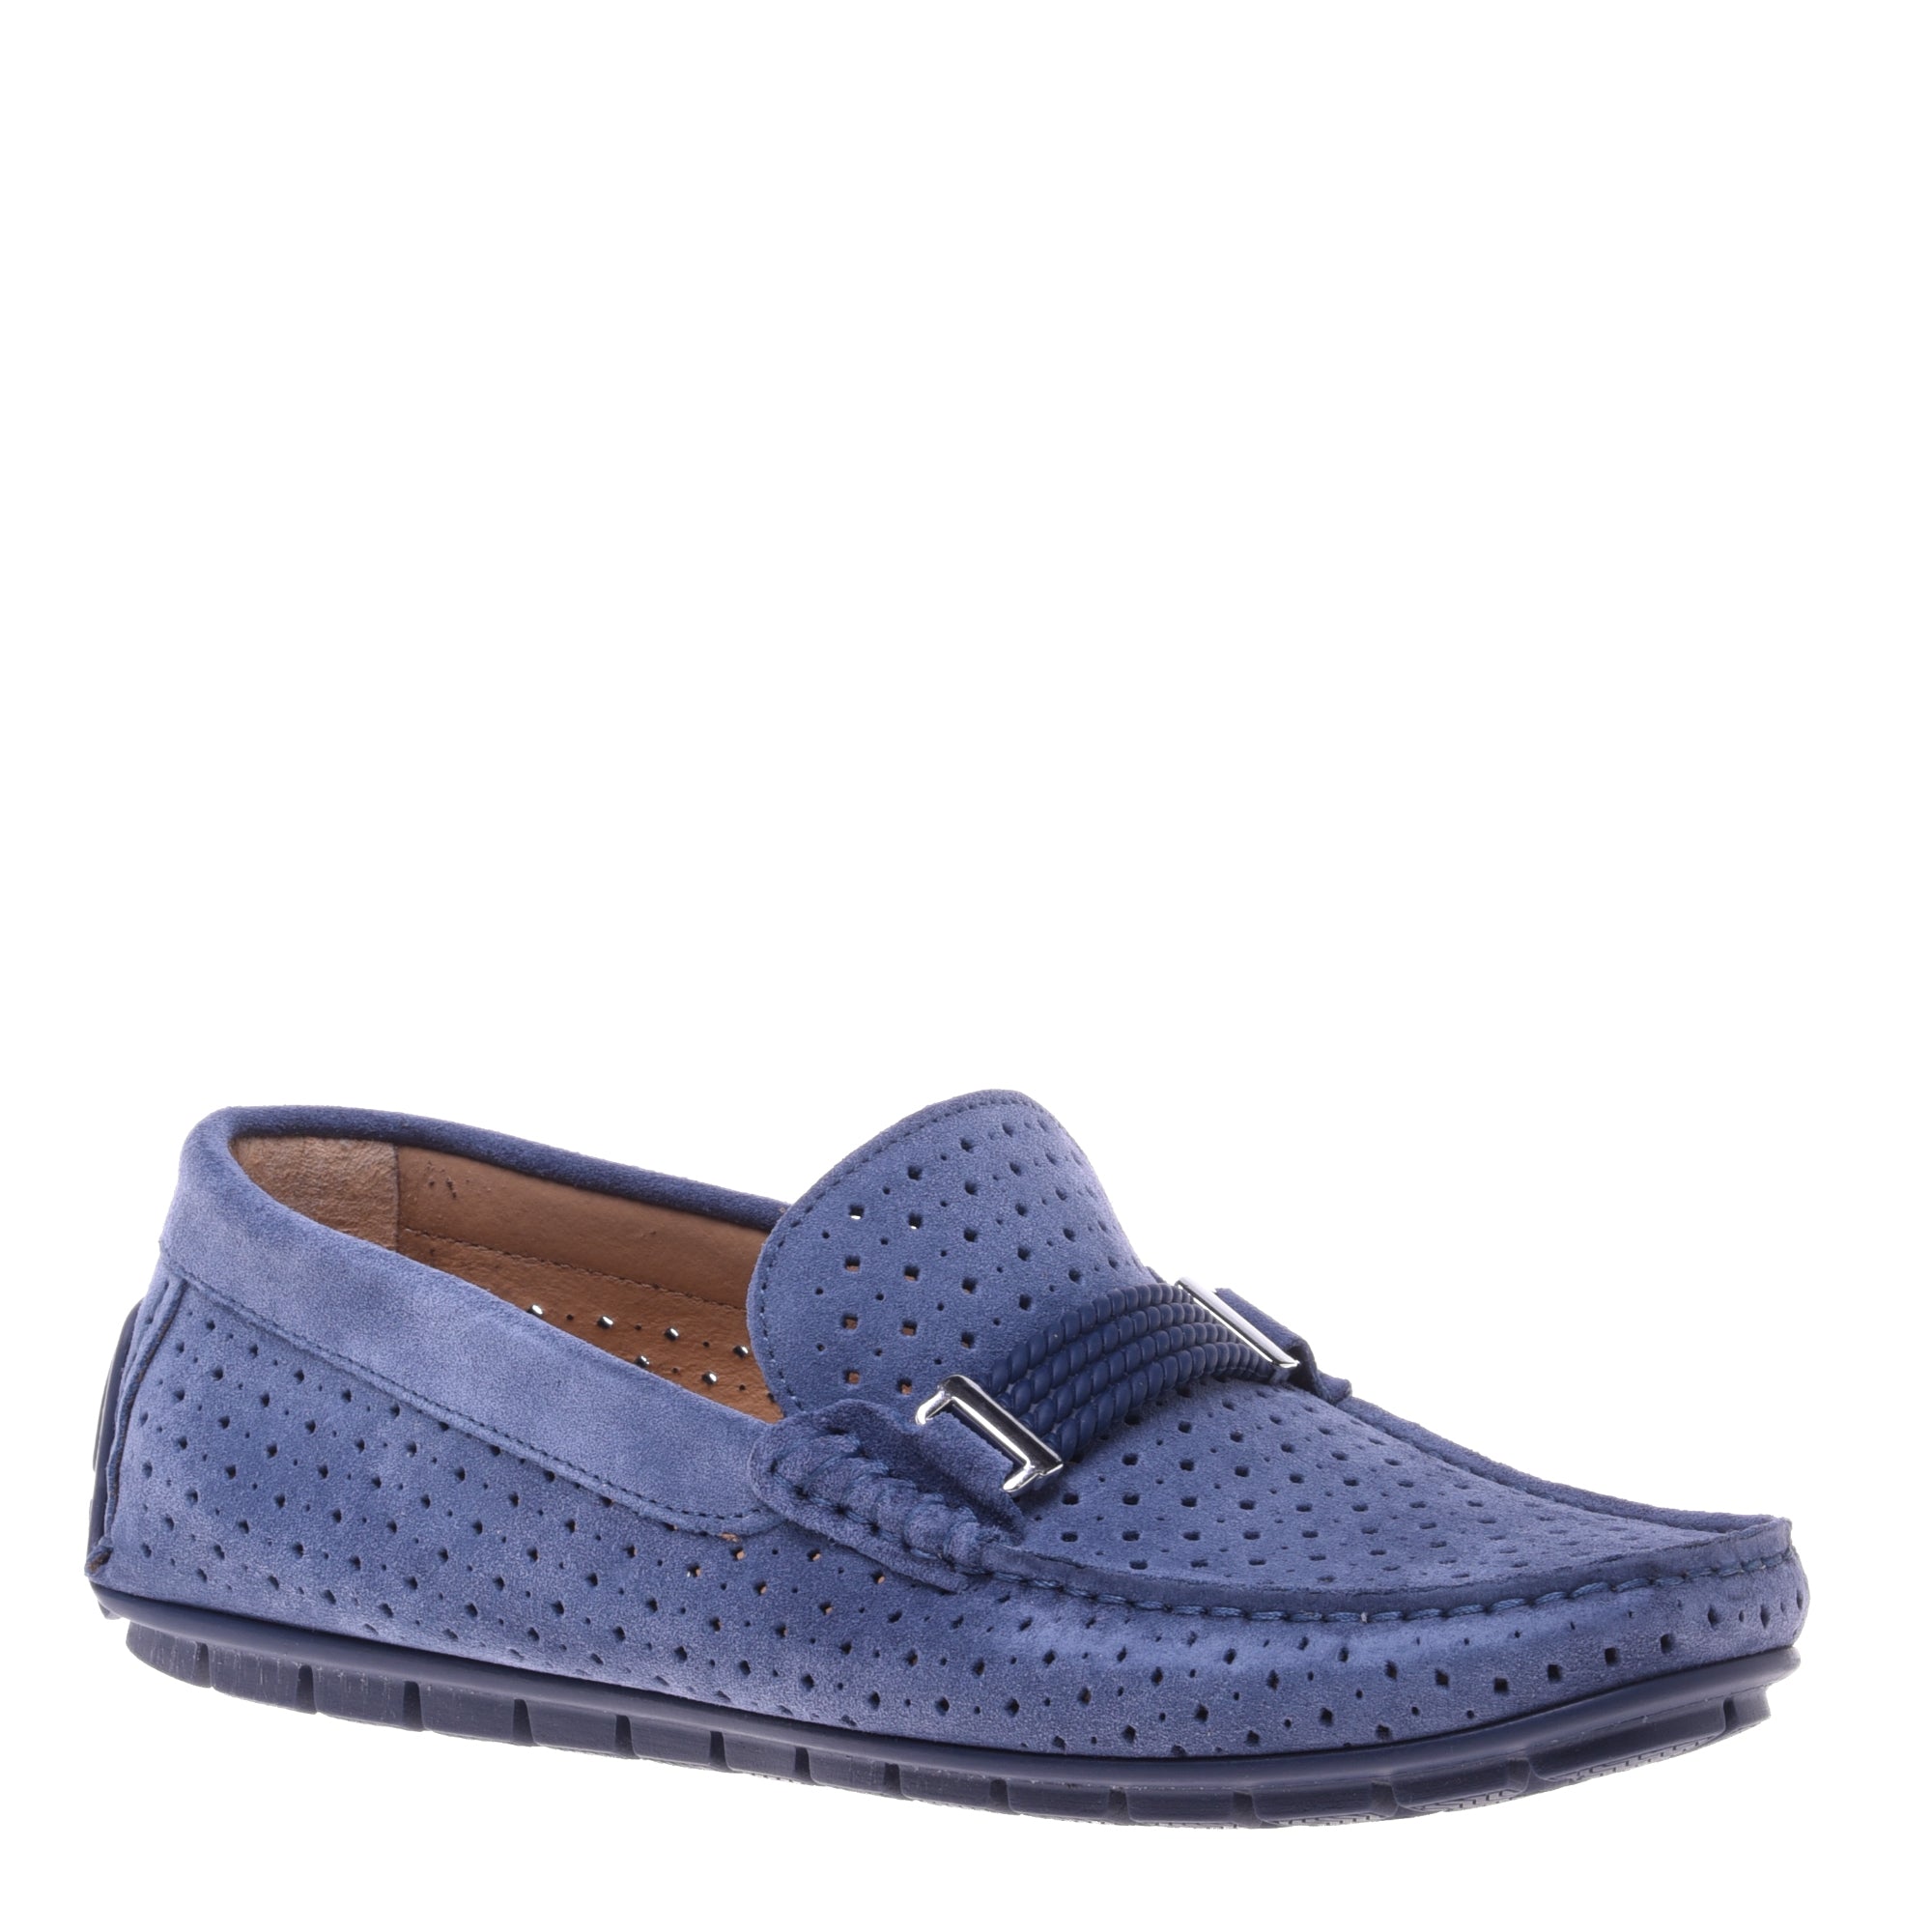 Loafer in denim perforated suede